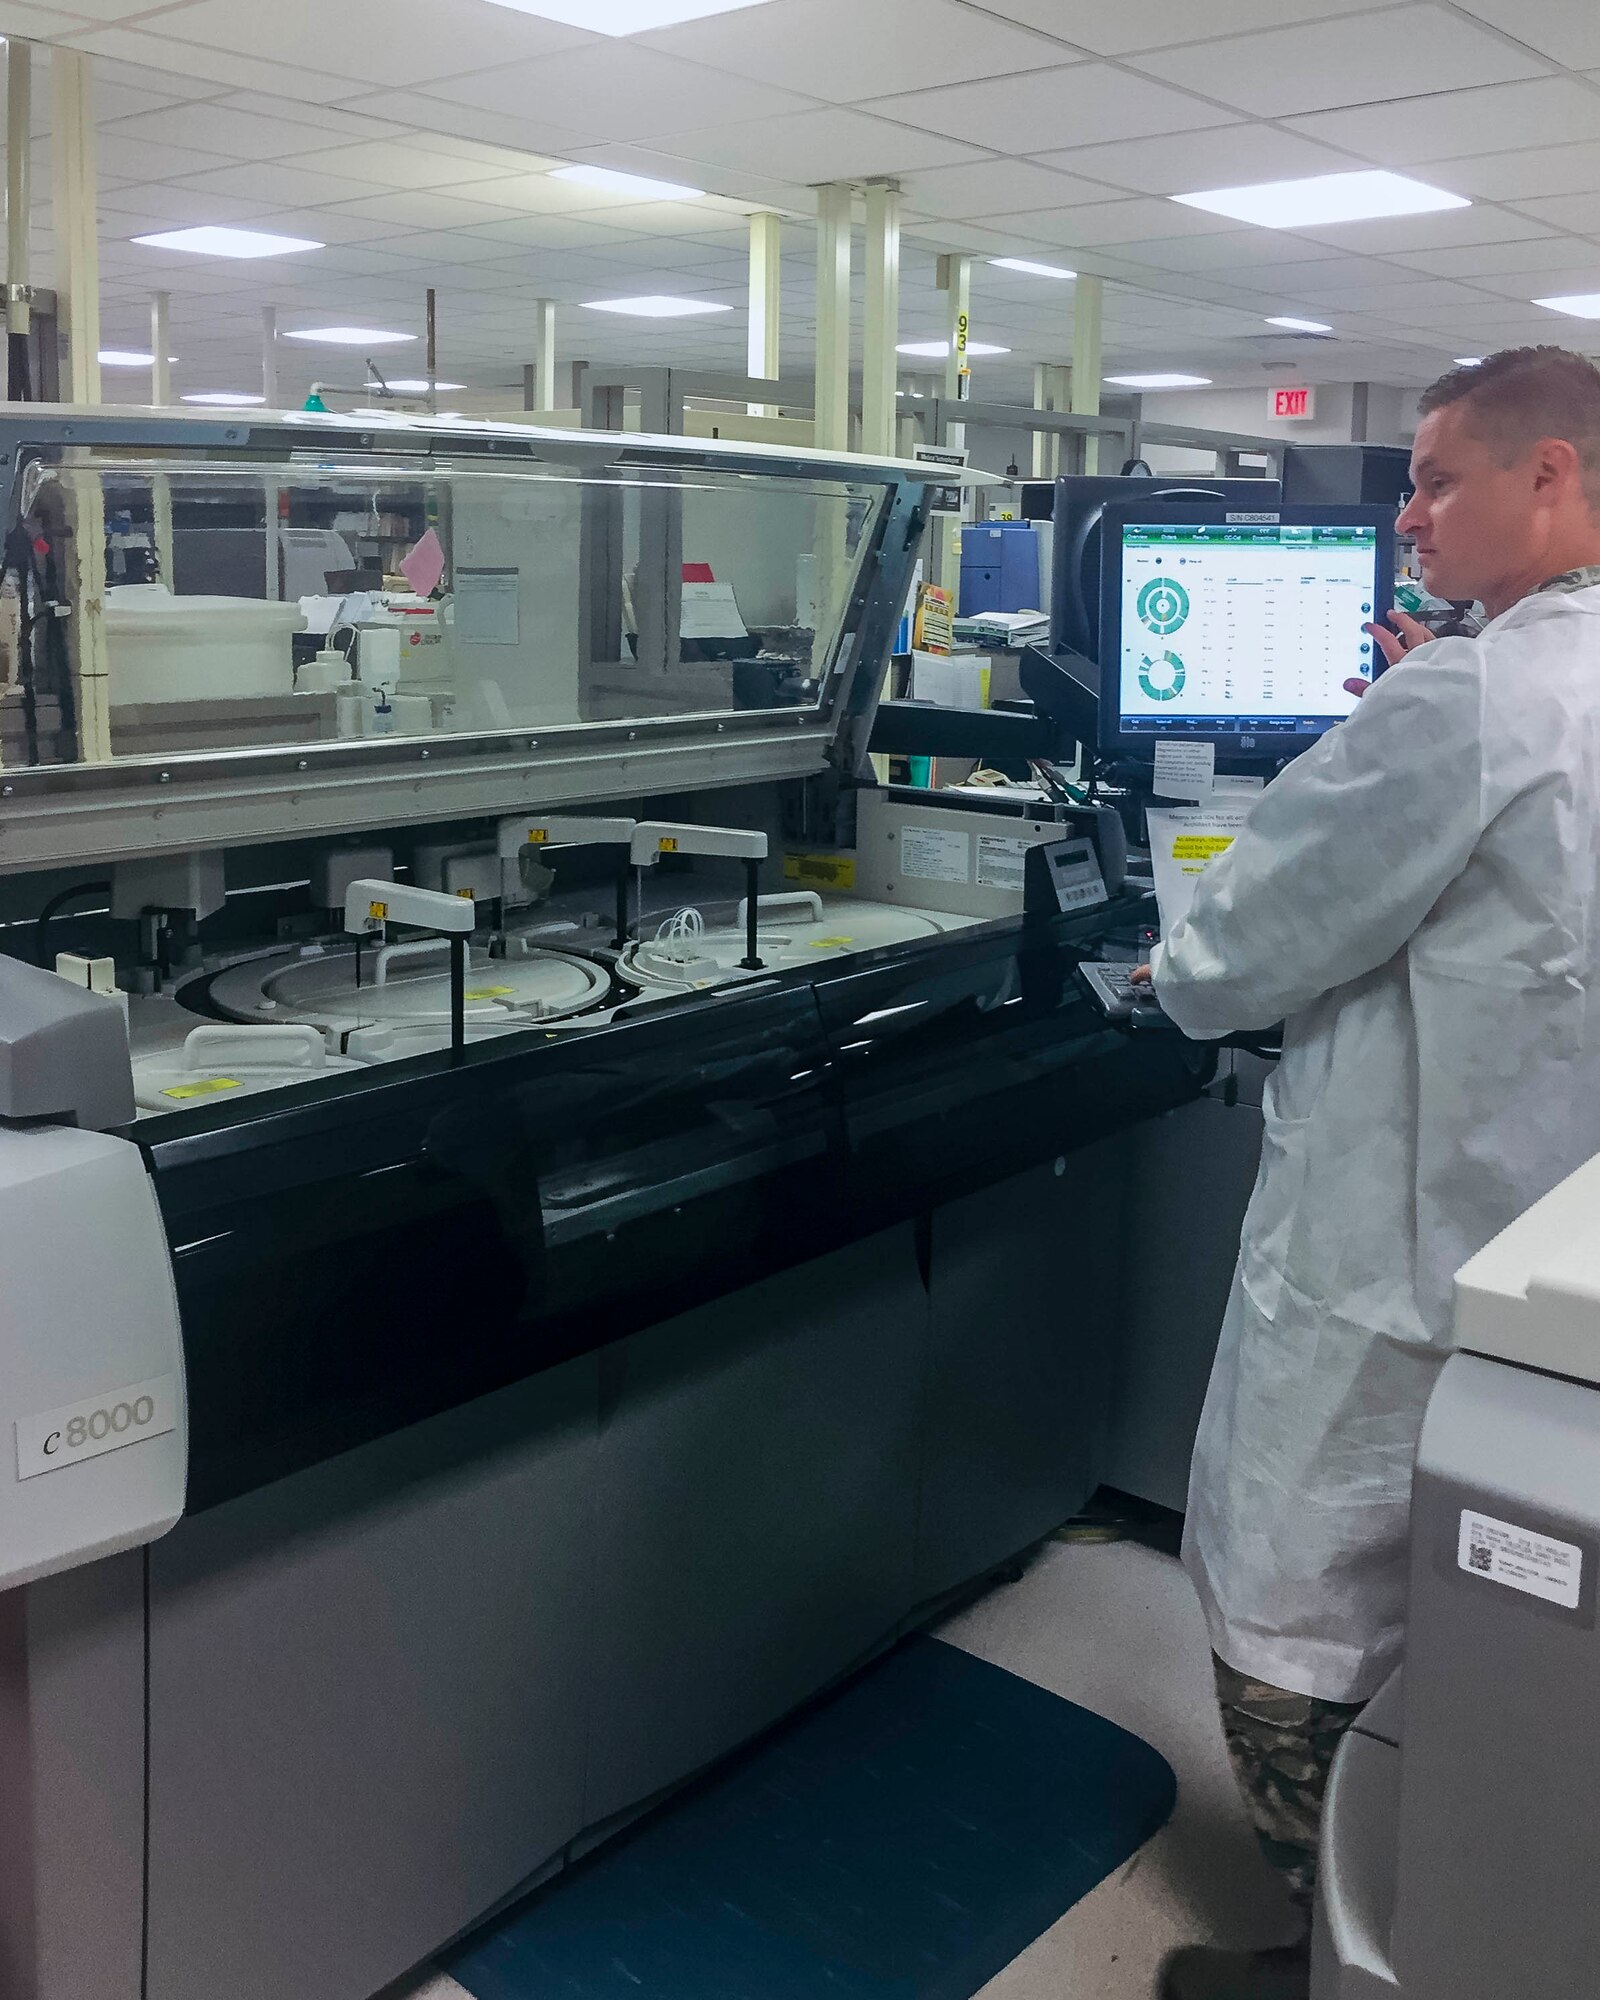 Tech. Sgt. Eric Ferguson, 913th Aerospace Medicine Squadron Lab Technician, works on pathology and lab equipment as part of their readiness training during June 6-15, 2019 at Tripler Army Medical Center, Honolulu. 913th AMDS members partnered with the medical center, which is the only federal tertiary care hospital in the Pacific Basin, focusing on areas such as pathology, blood bank, and clinical labs. (Courtesy photo)